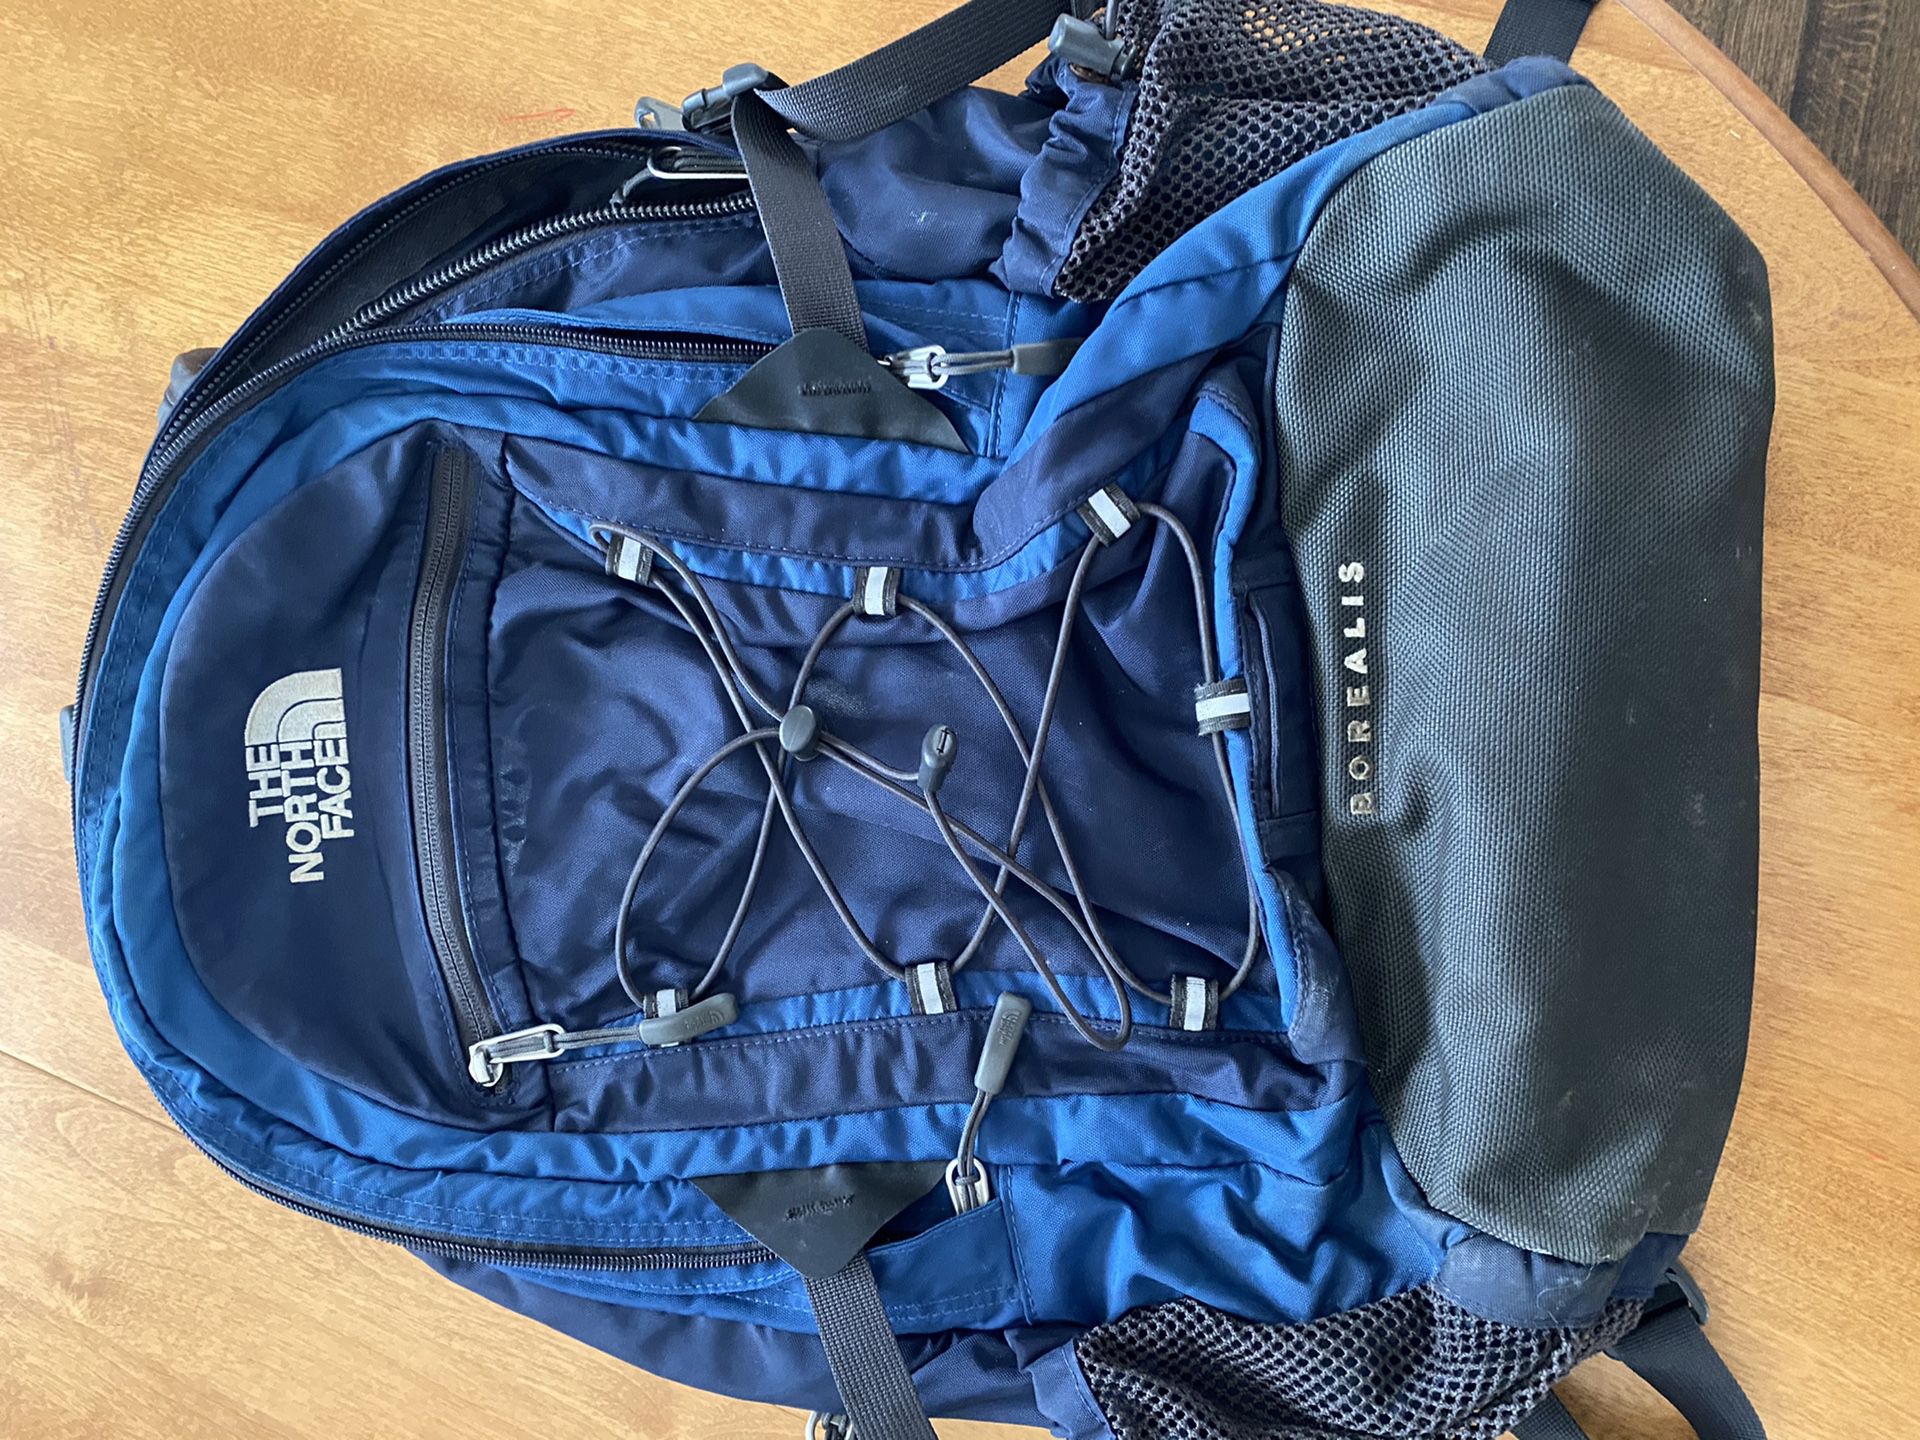 The NorthFace backpack